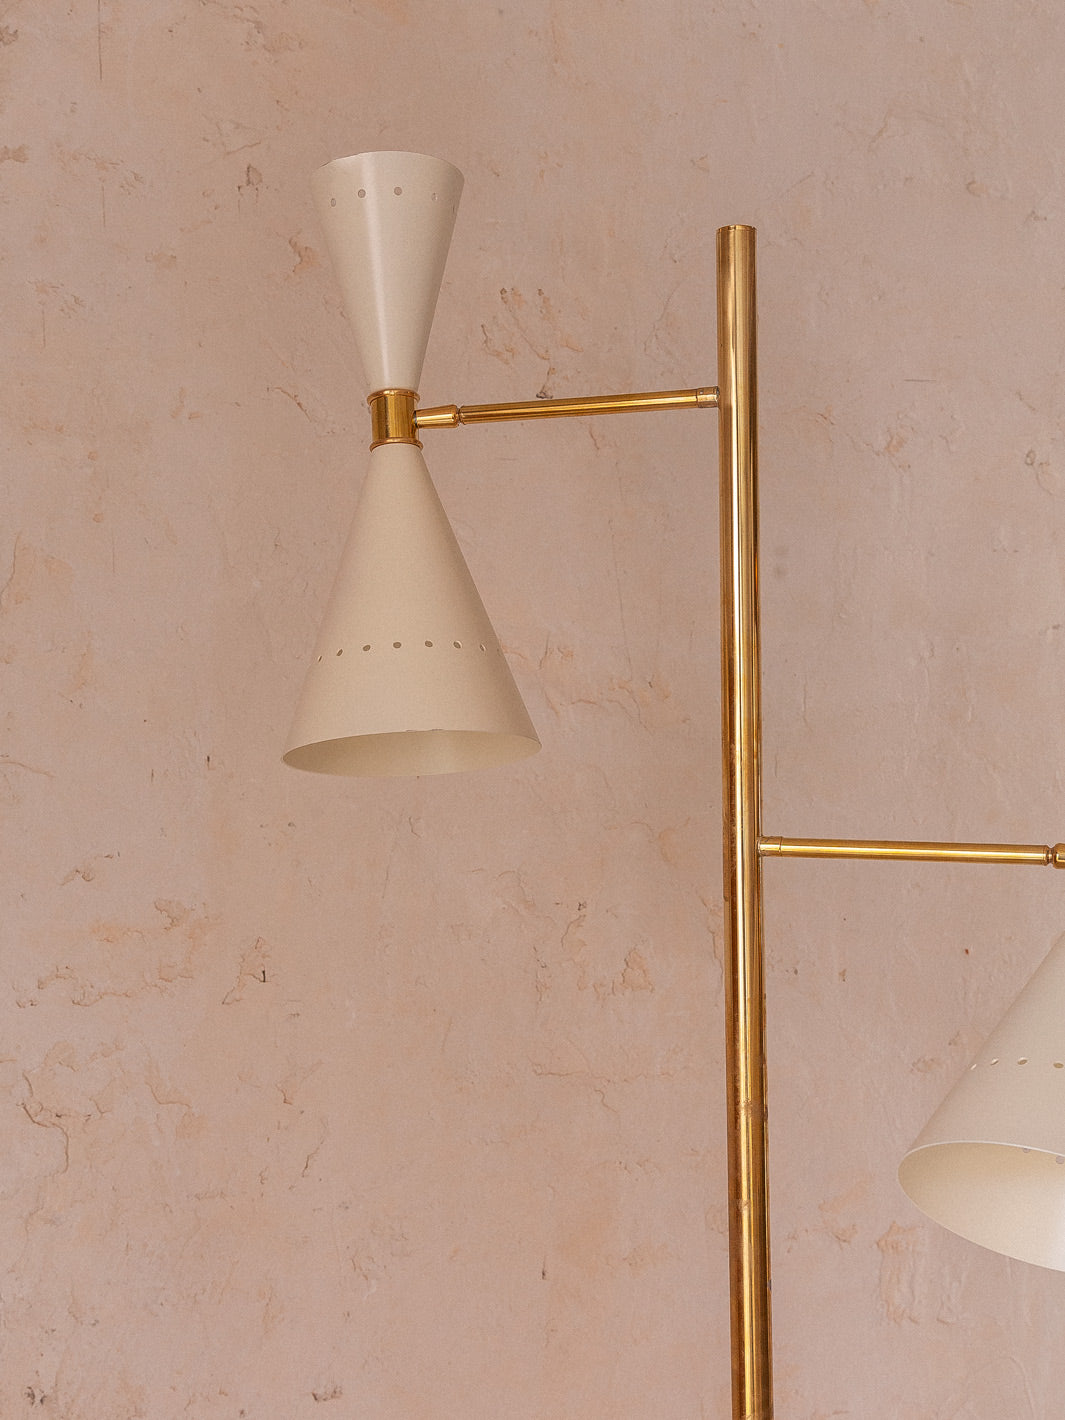 Brass floor lamp with white tulips